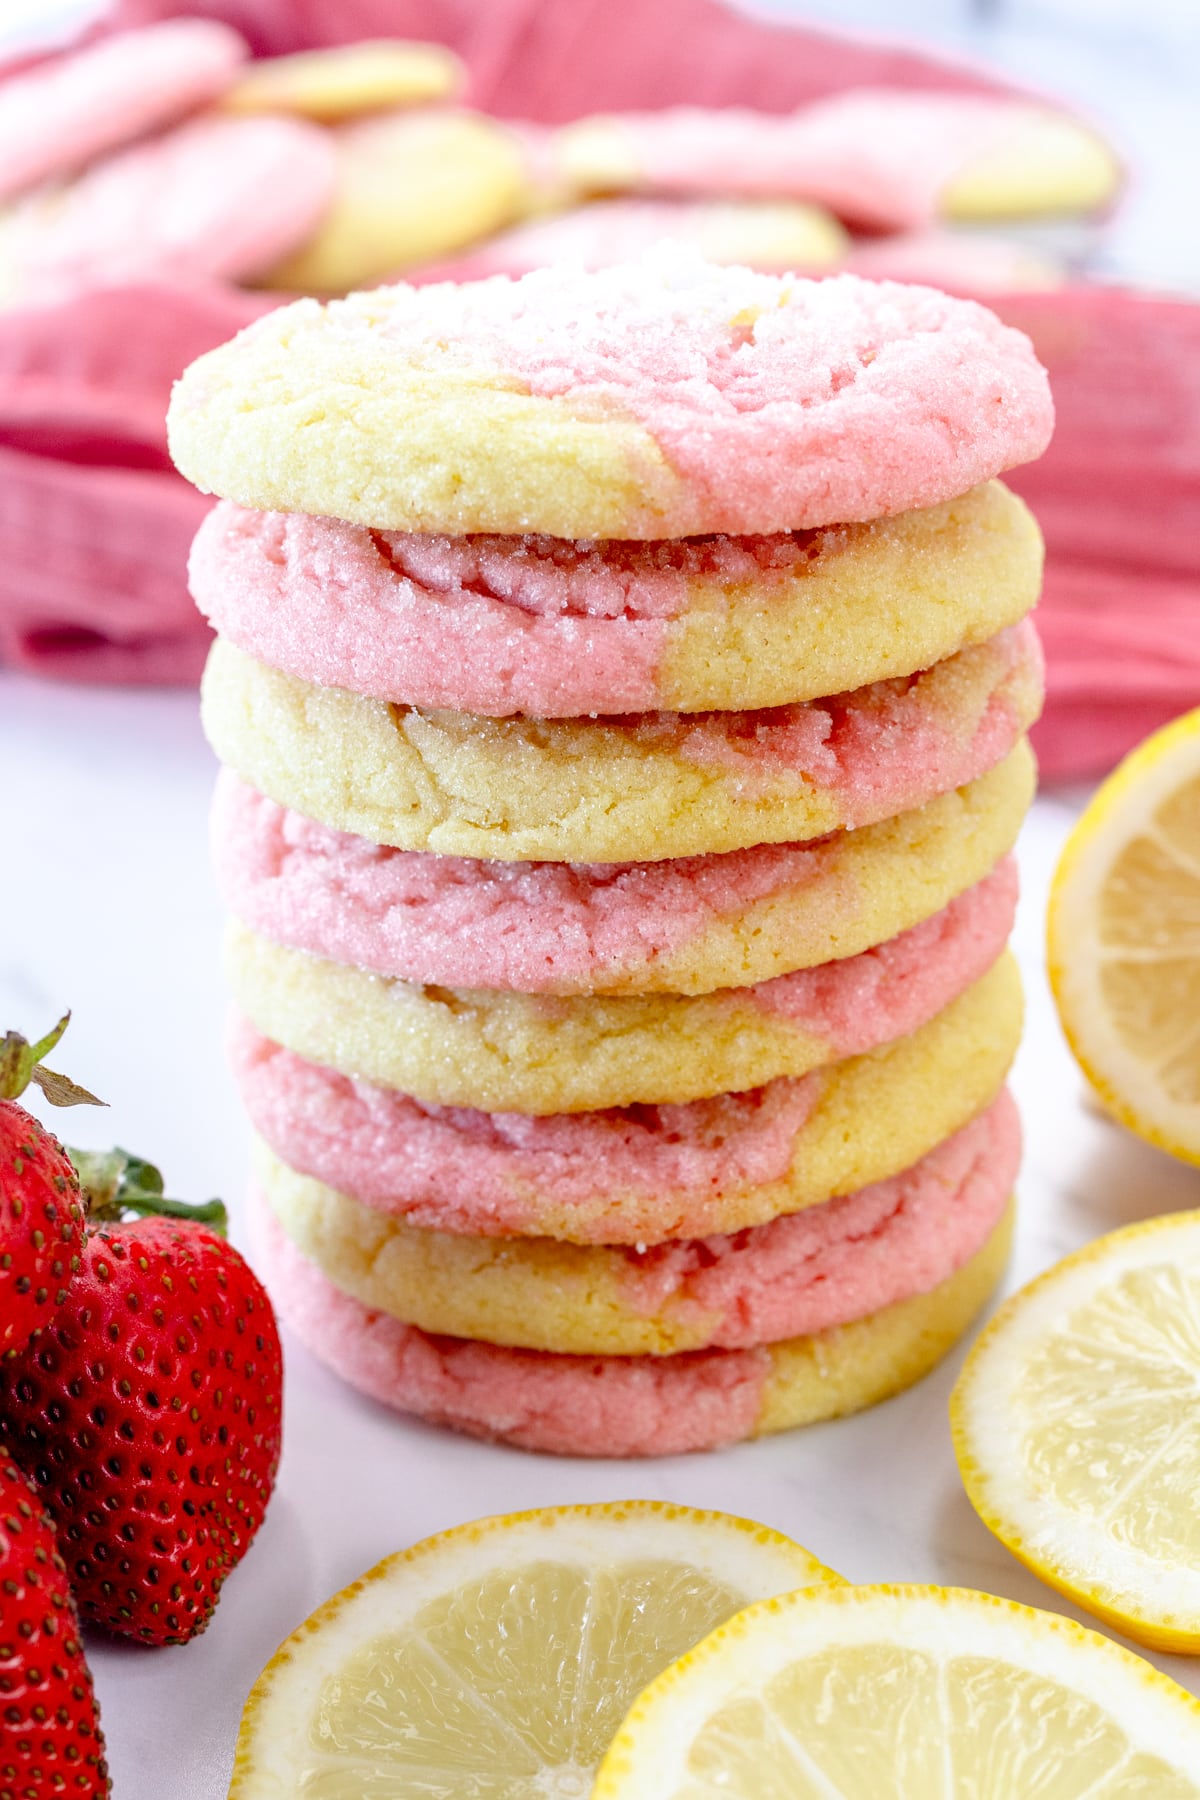 Close up view of Strawberry Lemonade Cookies on a grey surface, arranged in a stack, alongside strawberries and slices of lemon.